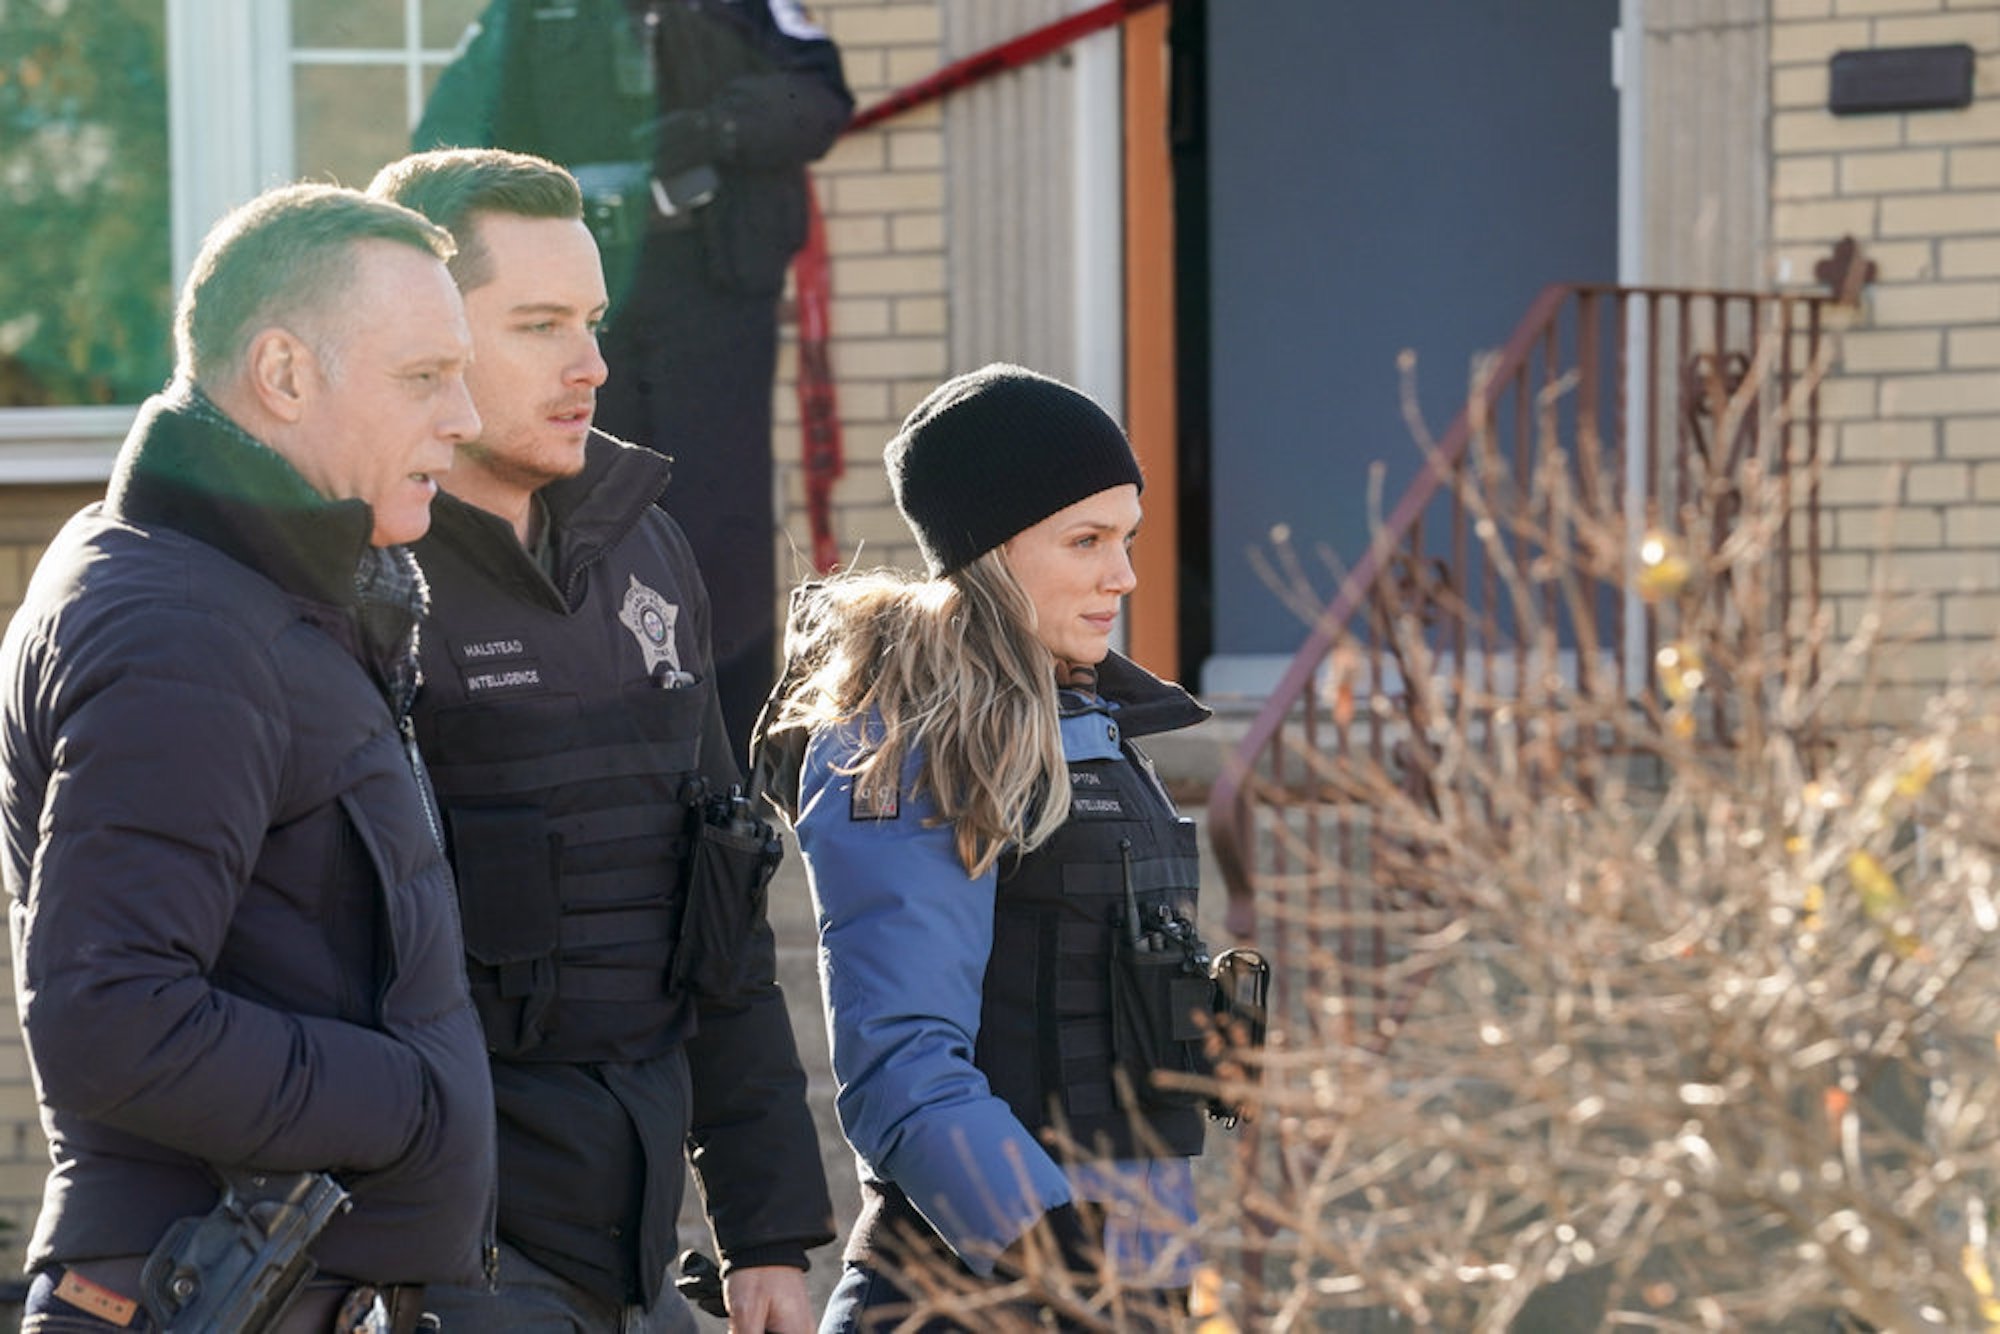 Hank Voight, Jay Halstead, and Hailey Upton in 'Chicago P.D.' Season 9 Episode 12